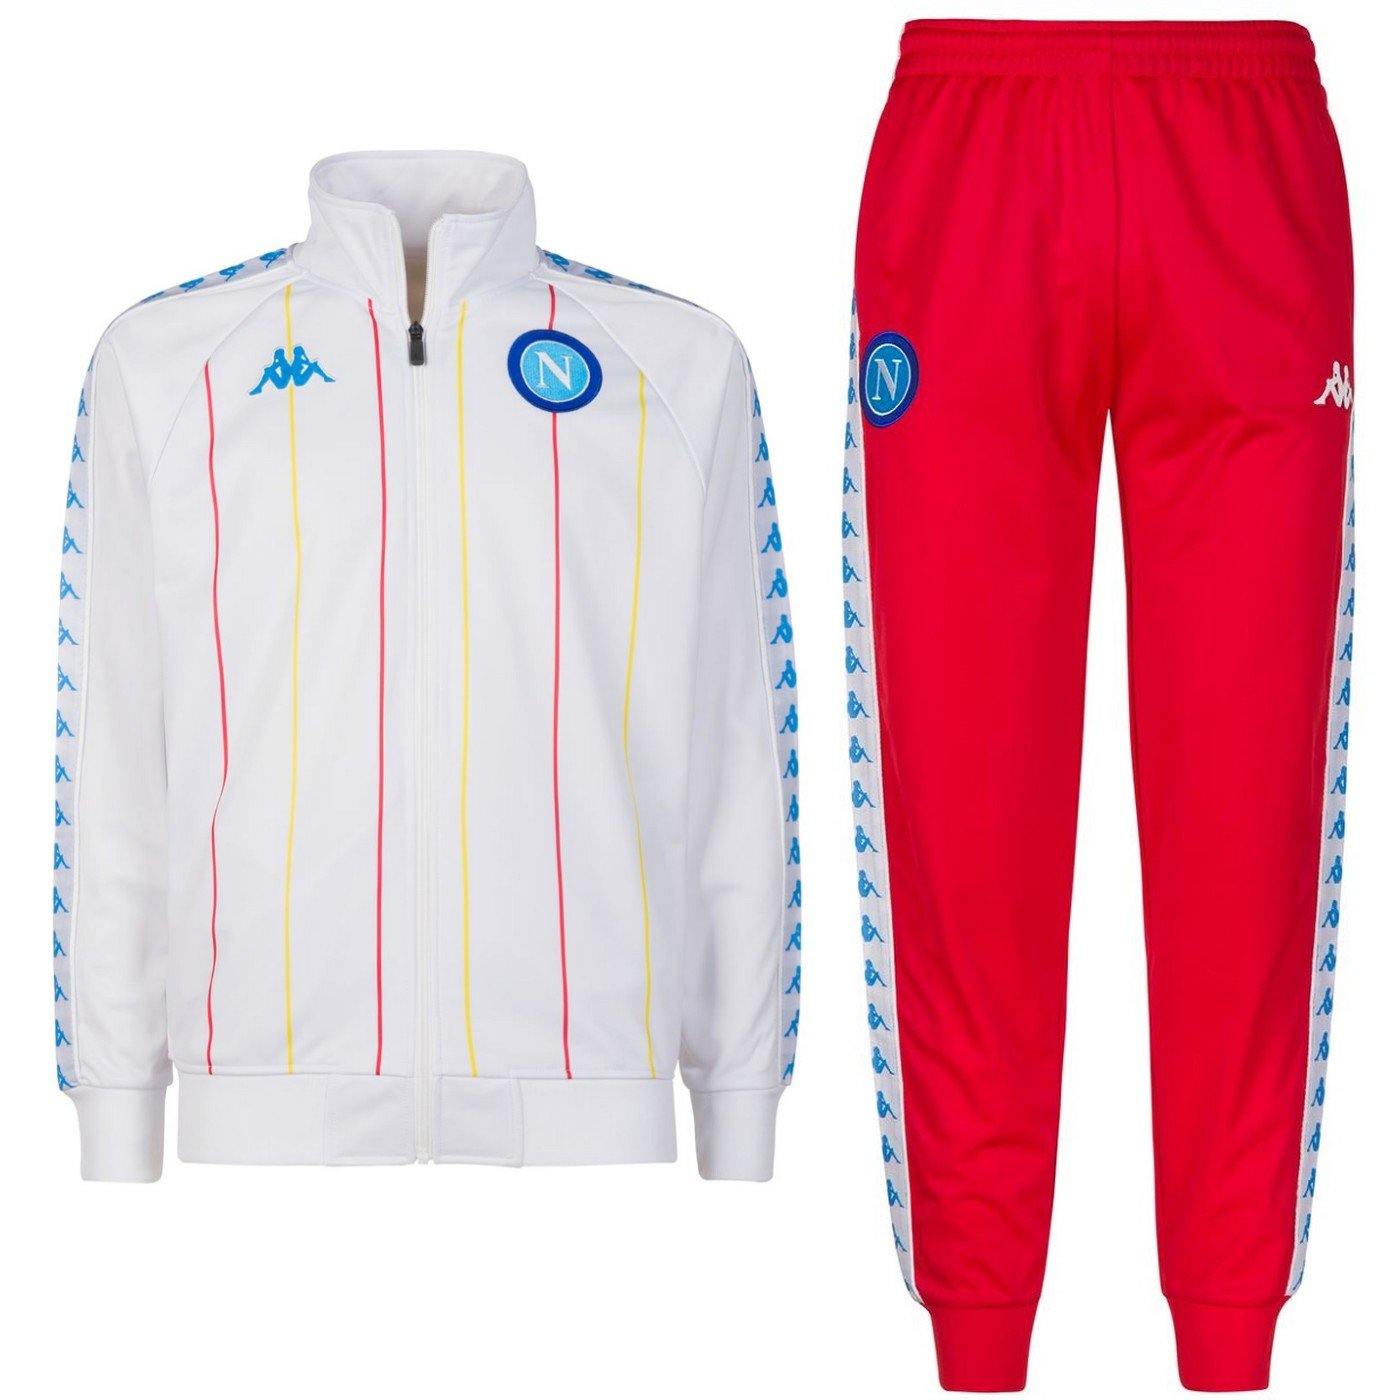 SSC Napoli Limited Edition casual soccer tracksuit 2018/19 white - – SoccerTracksuits.com